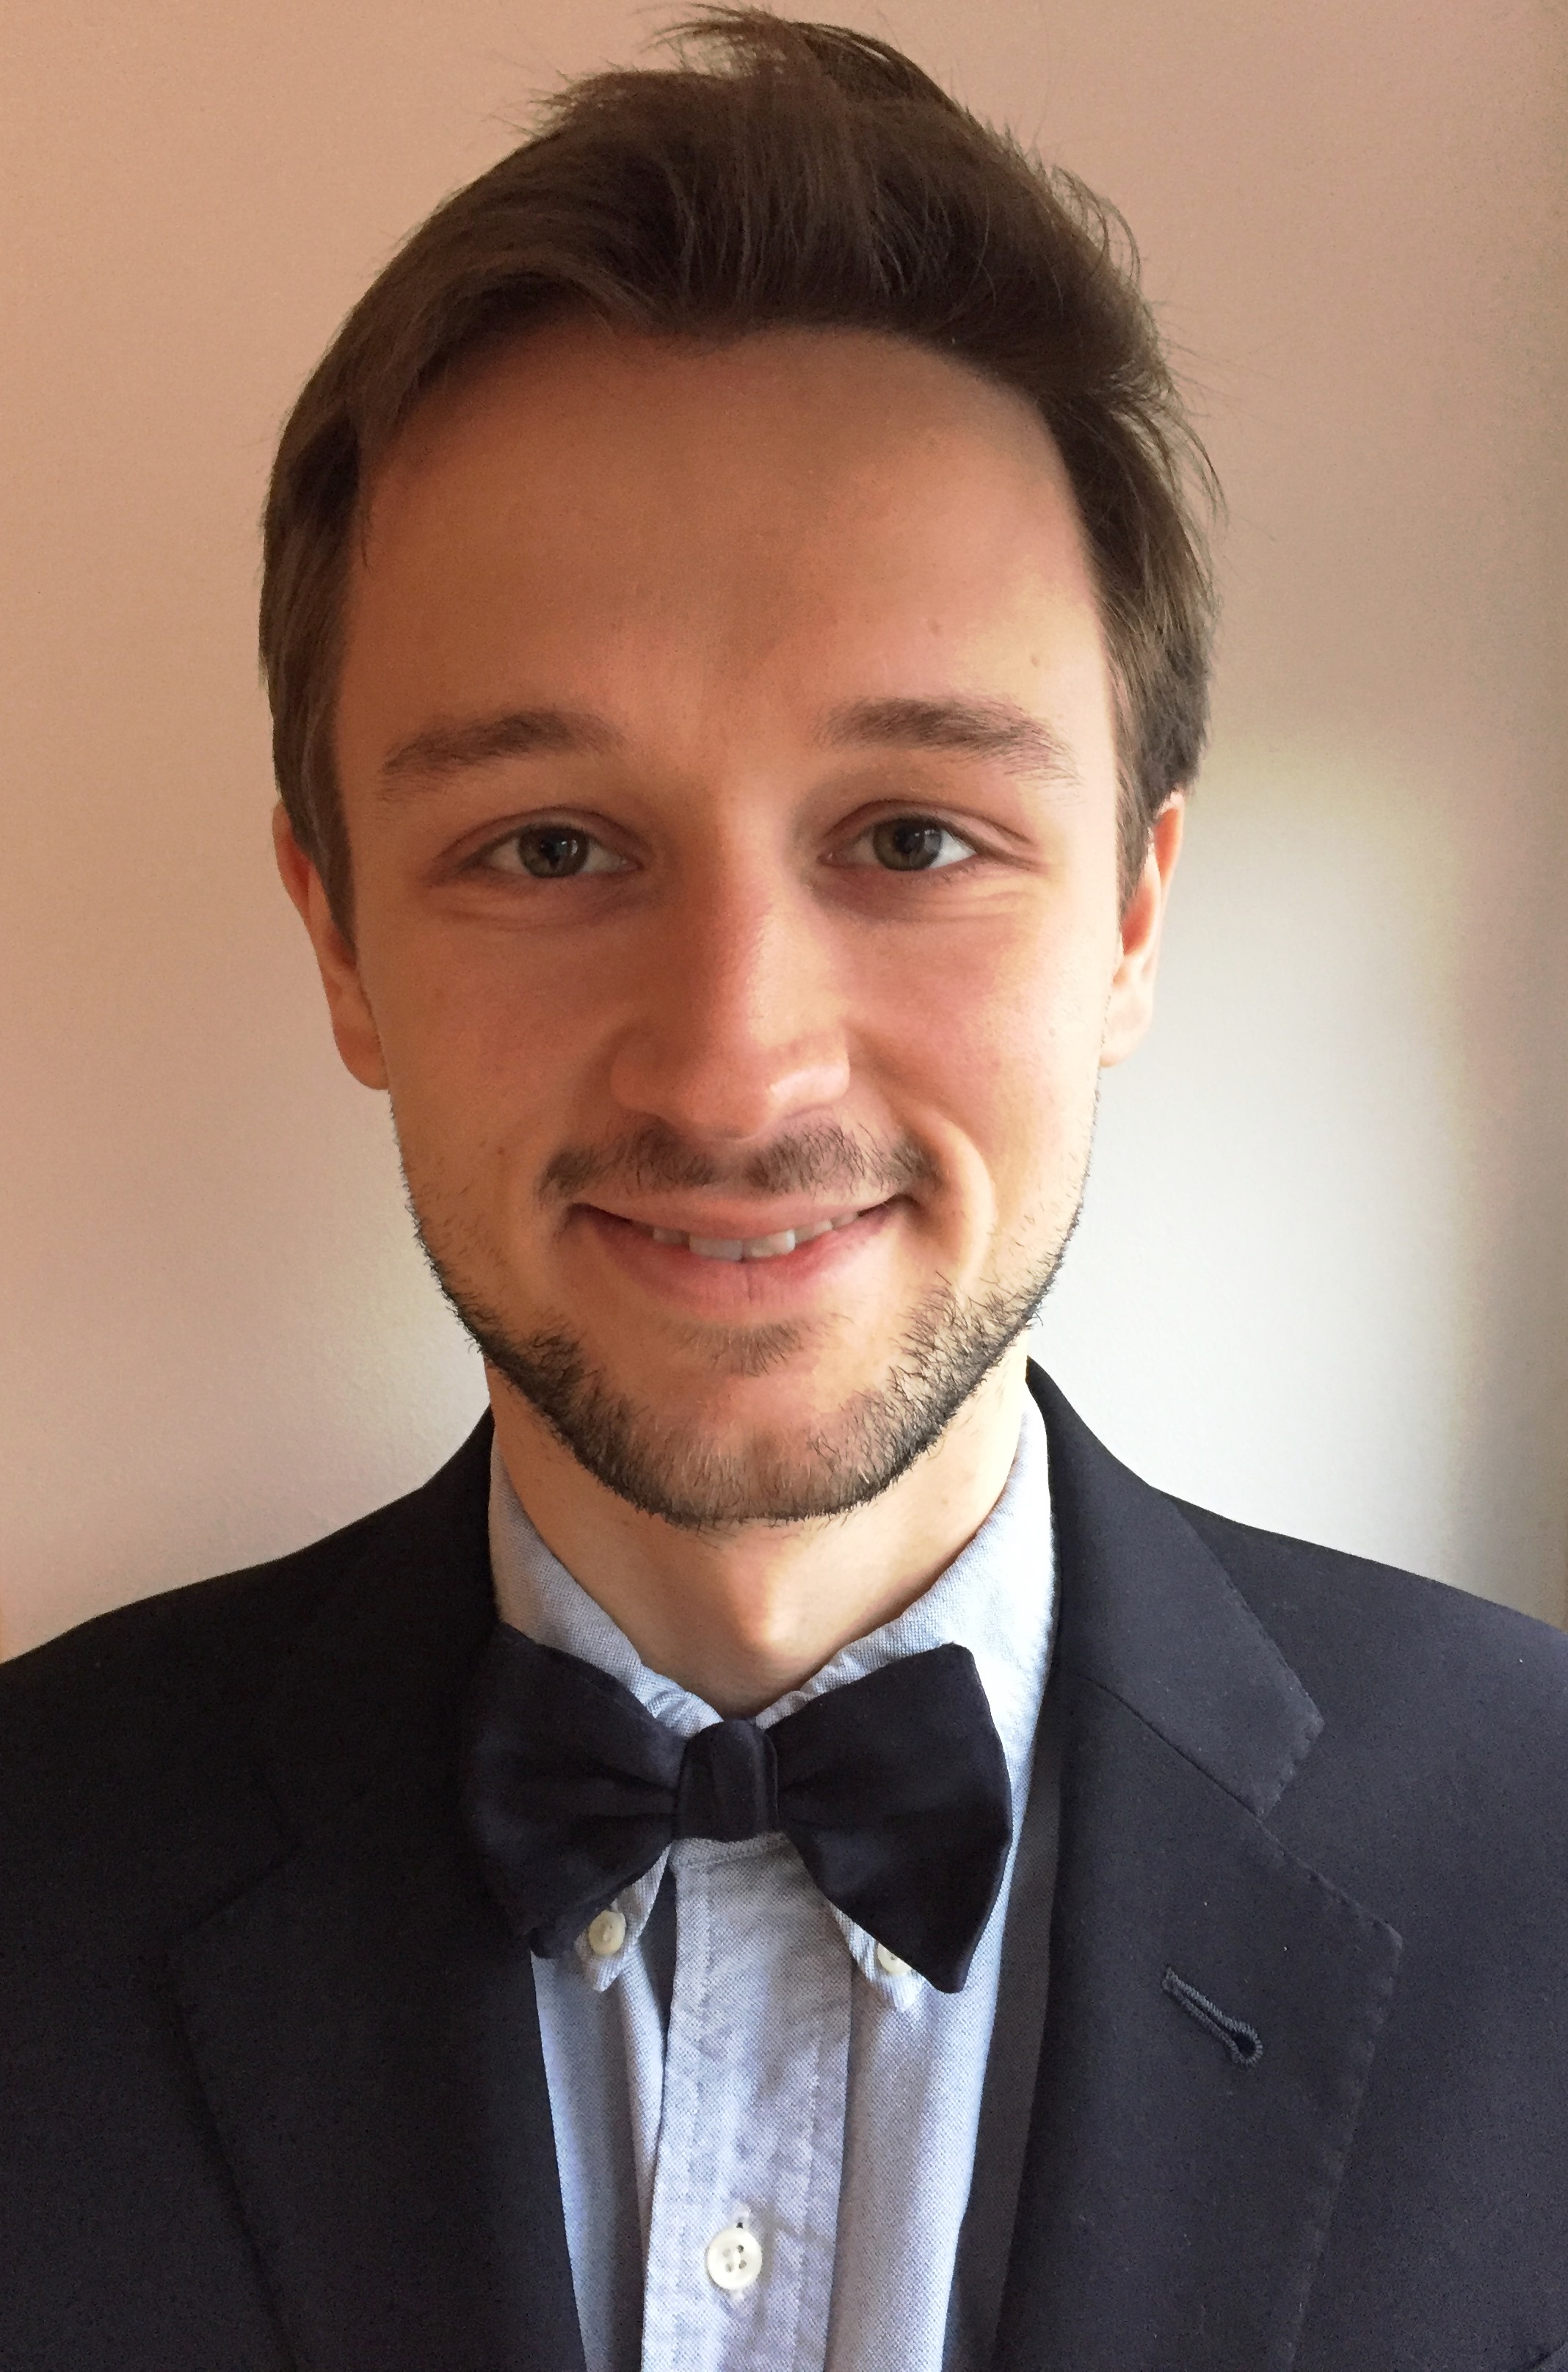 PhD student and Doctor of Medicine Nicolai Jacob Wewer Albrechtsen